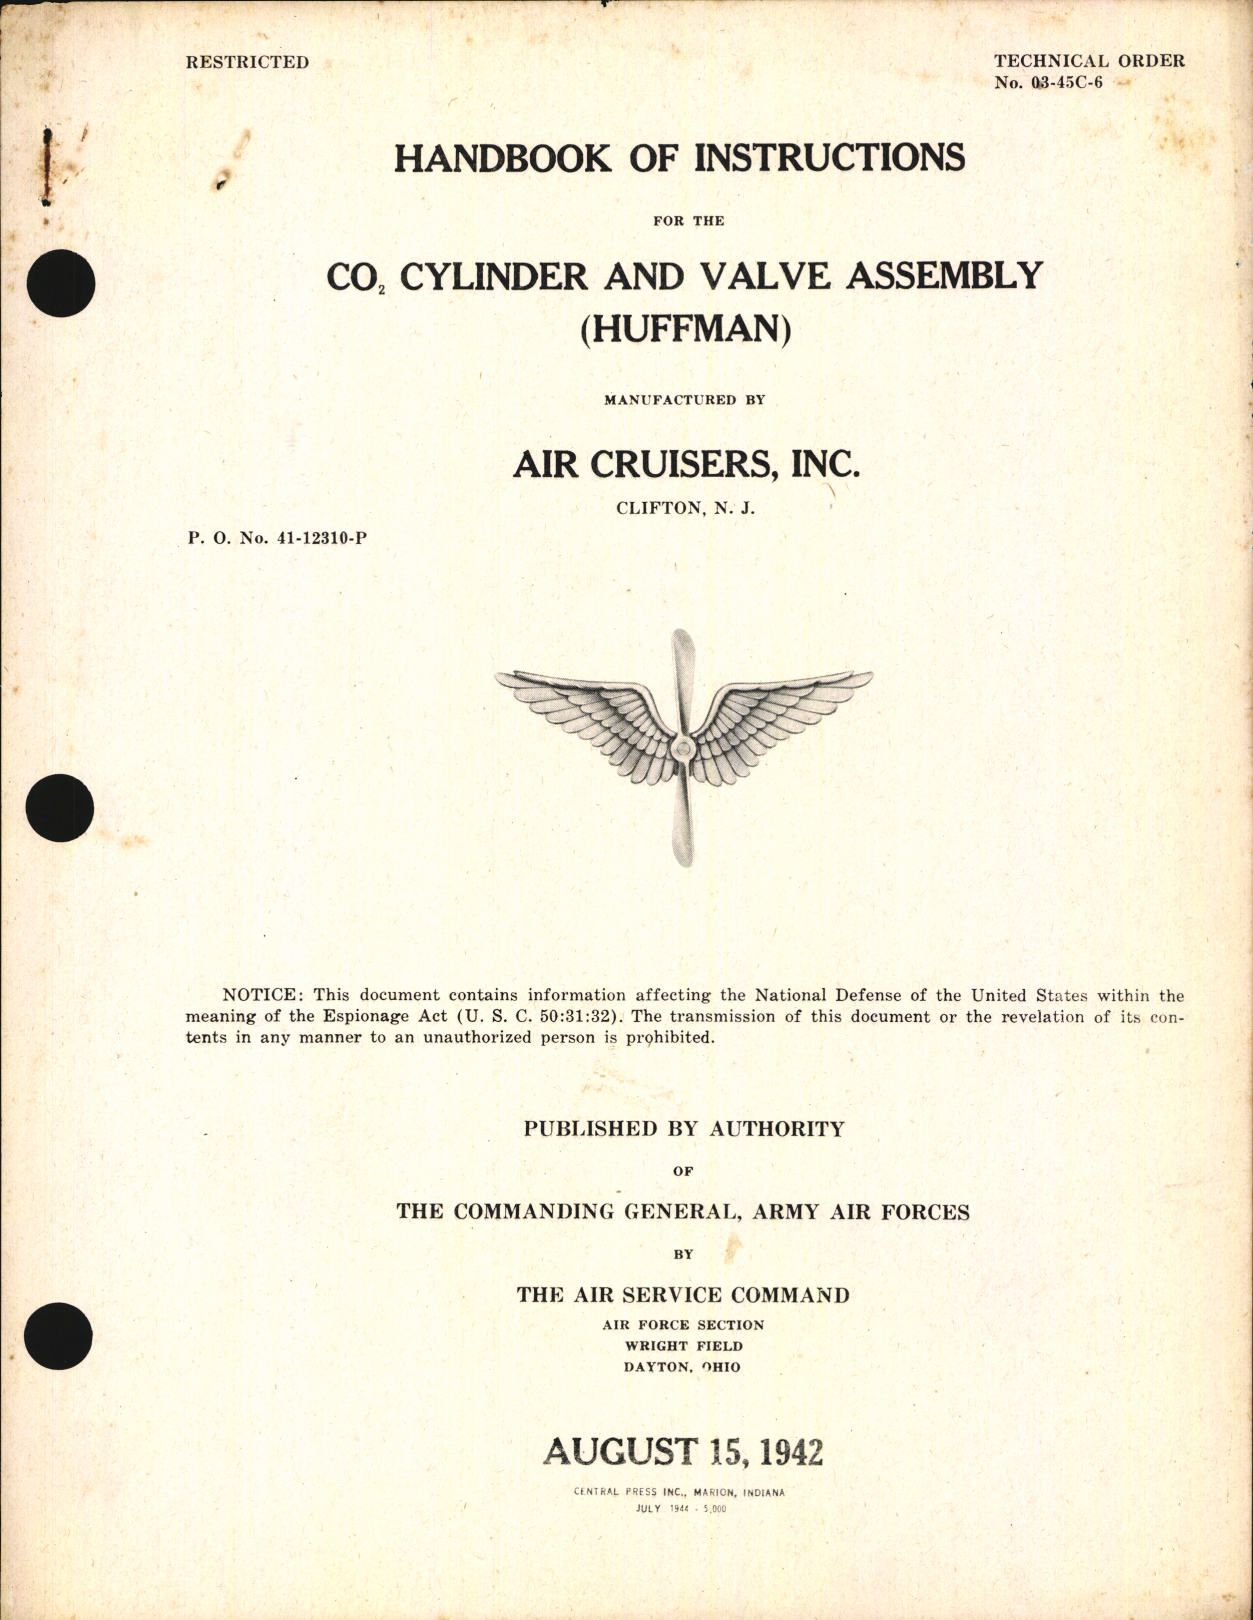 Sample page 1 from AirCorps Library document: Handbook of Instructions for Huffman CO2 Cylinder and Valve Assembly